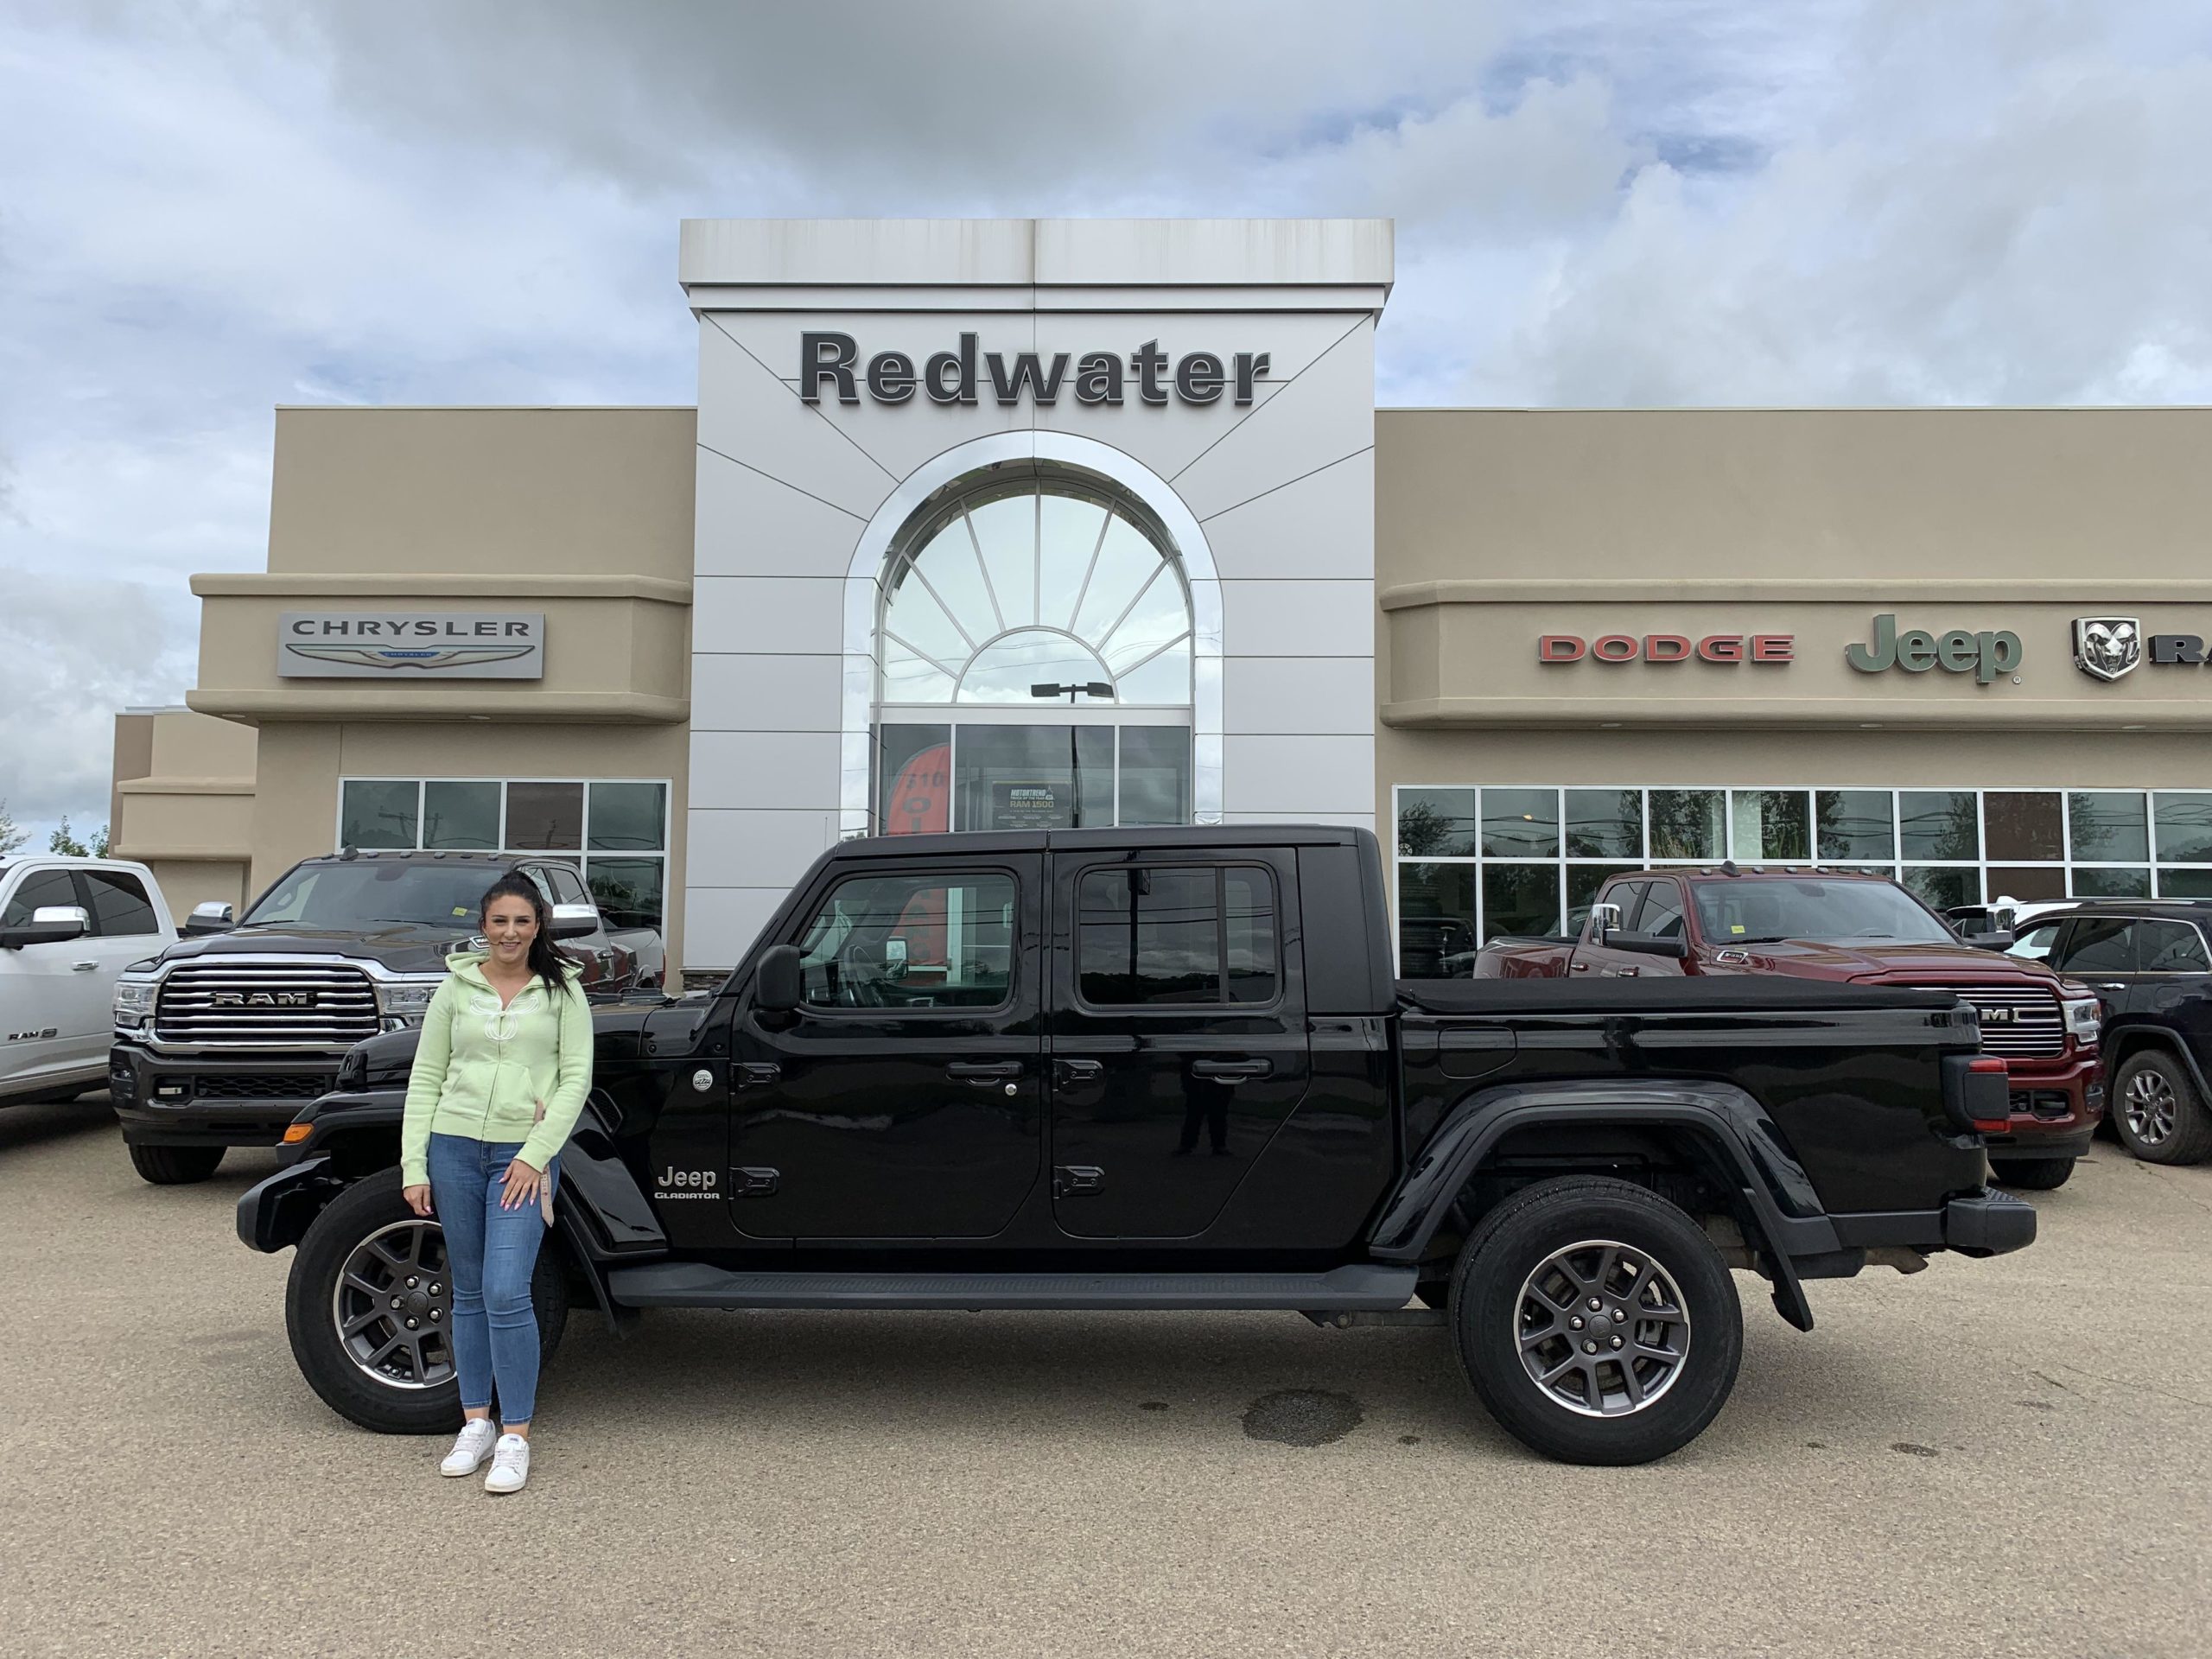 NR14849A 2020 Jeep Gladiator Overland 4x4 Redwater Dodge